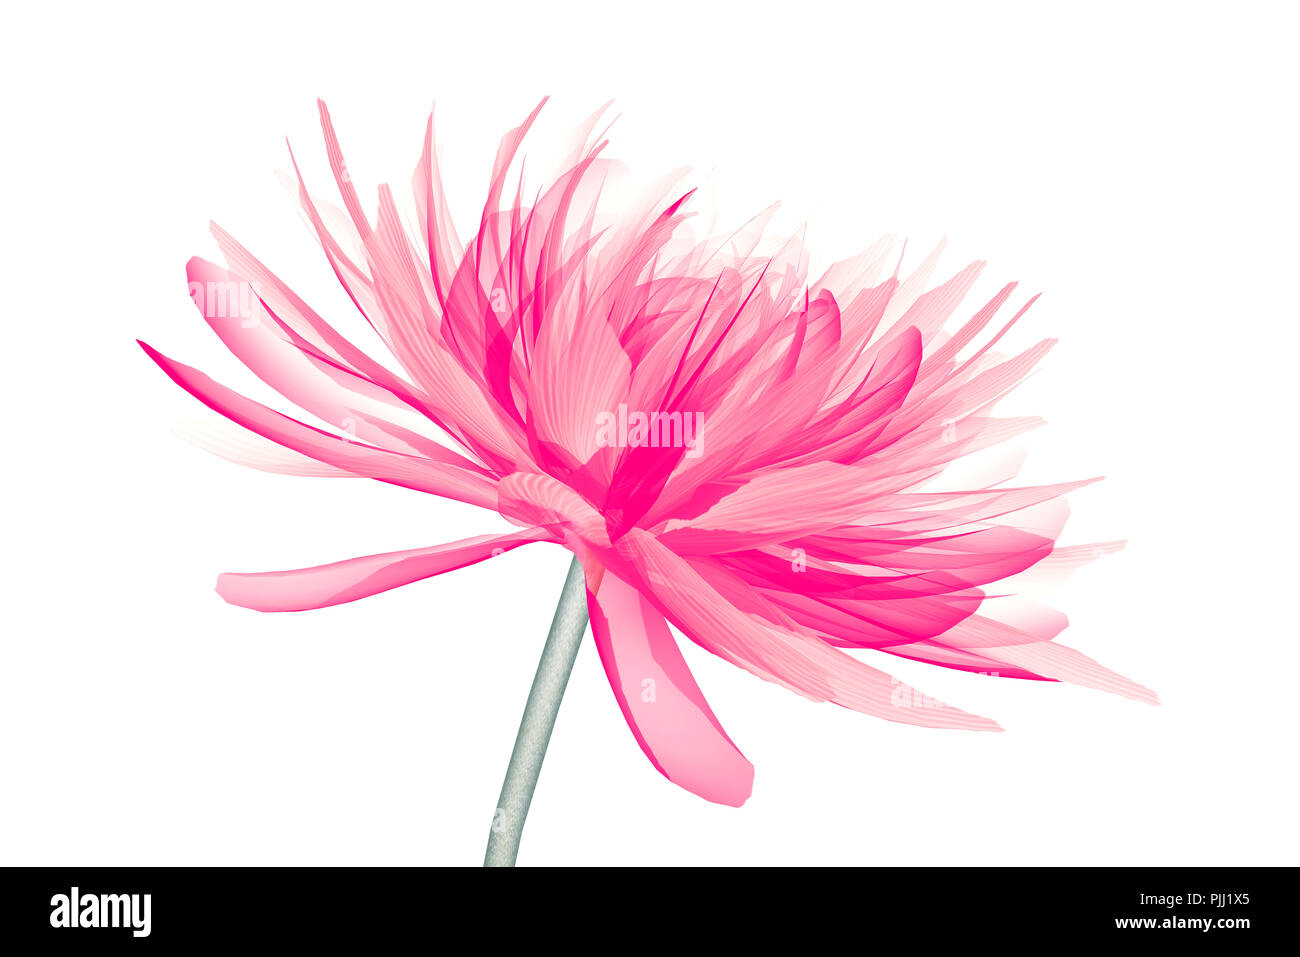 x-ray image of a flower  isolated on white, the Dahlia 3d illustration Stock Photo